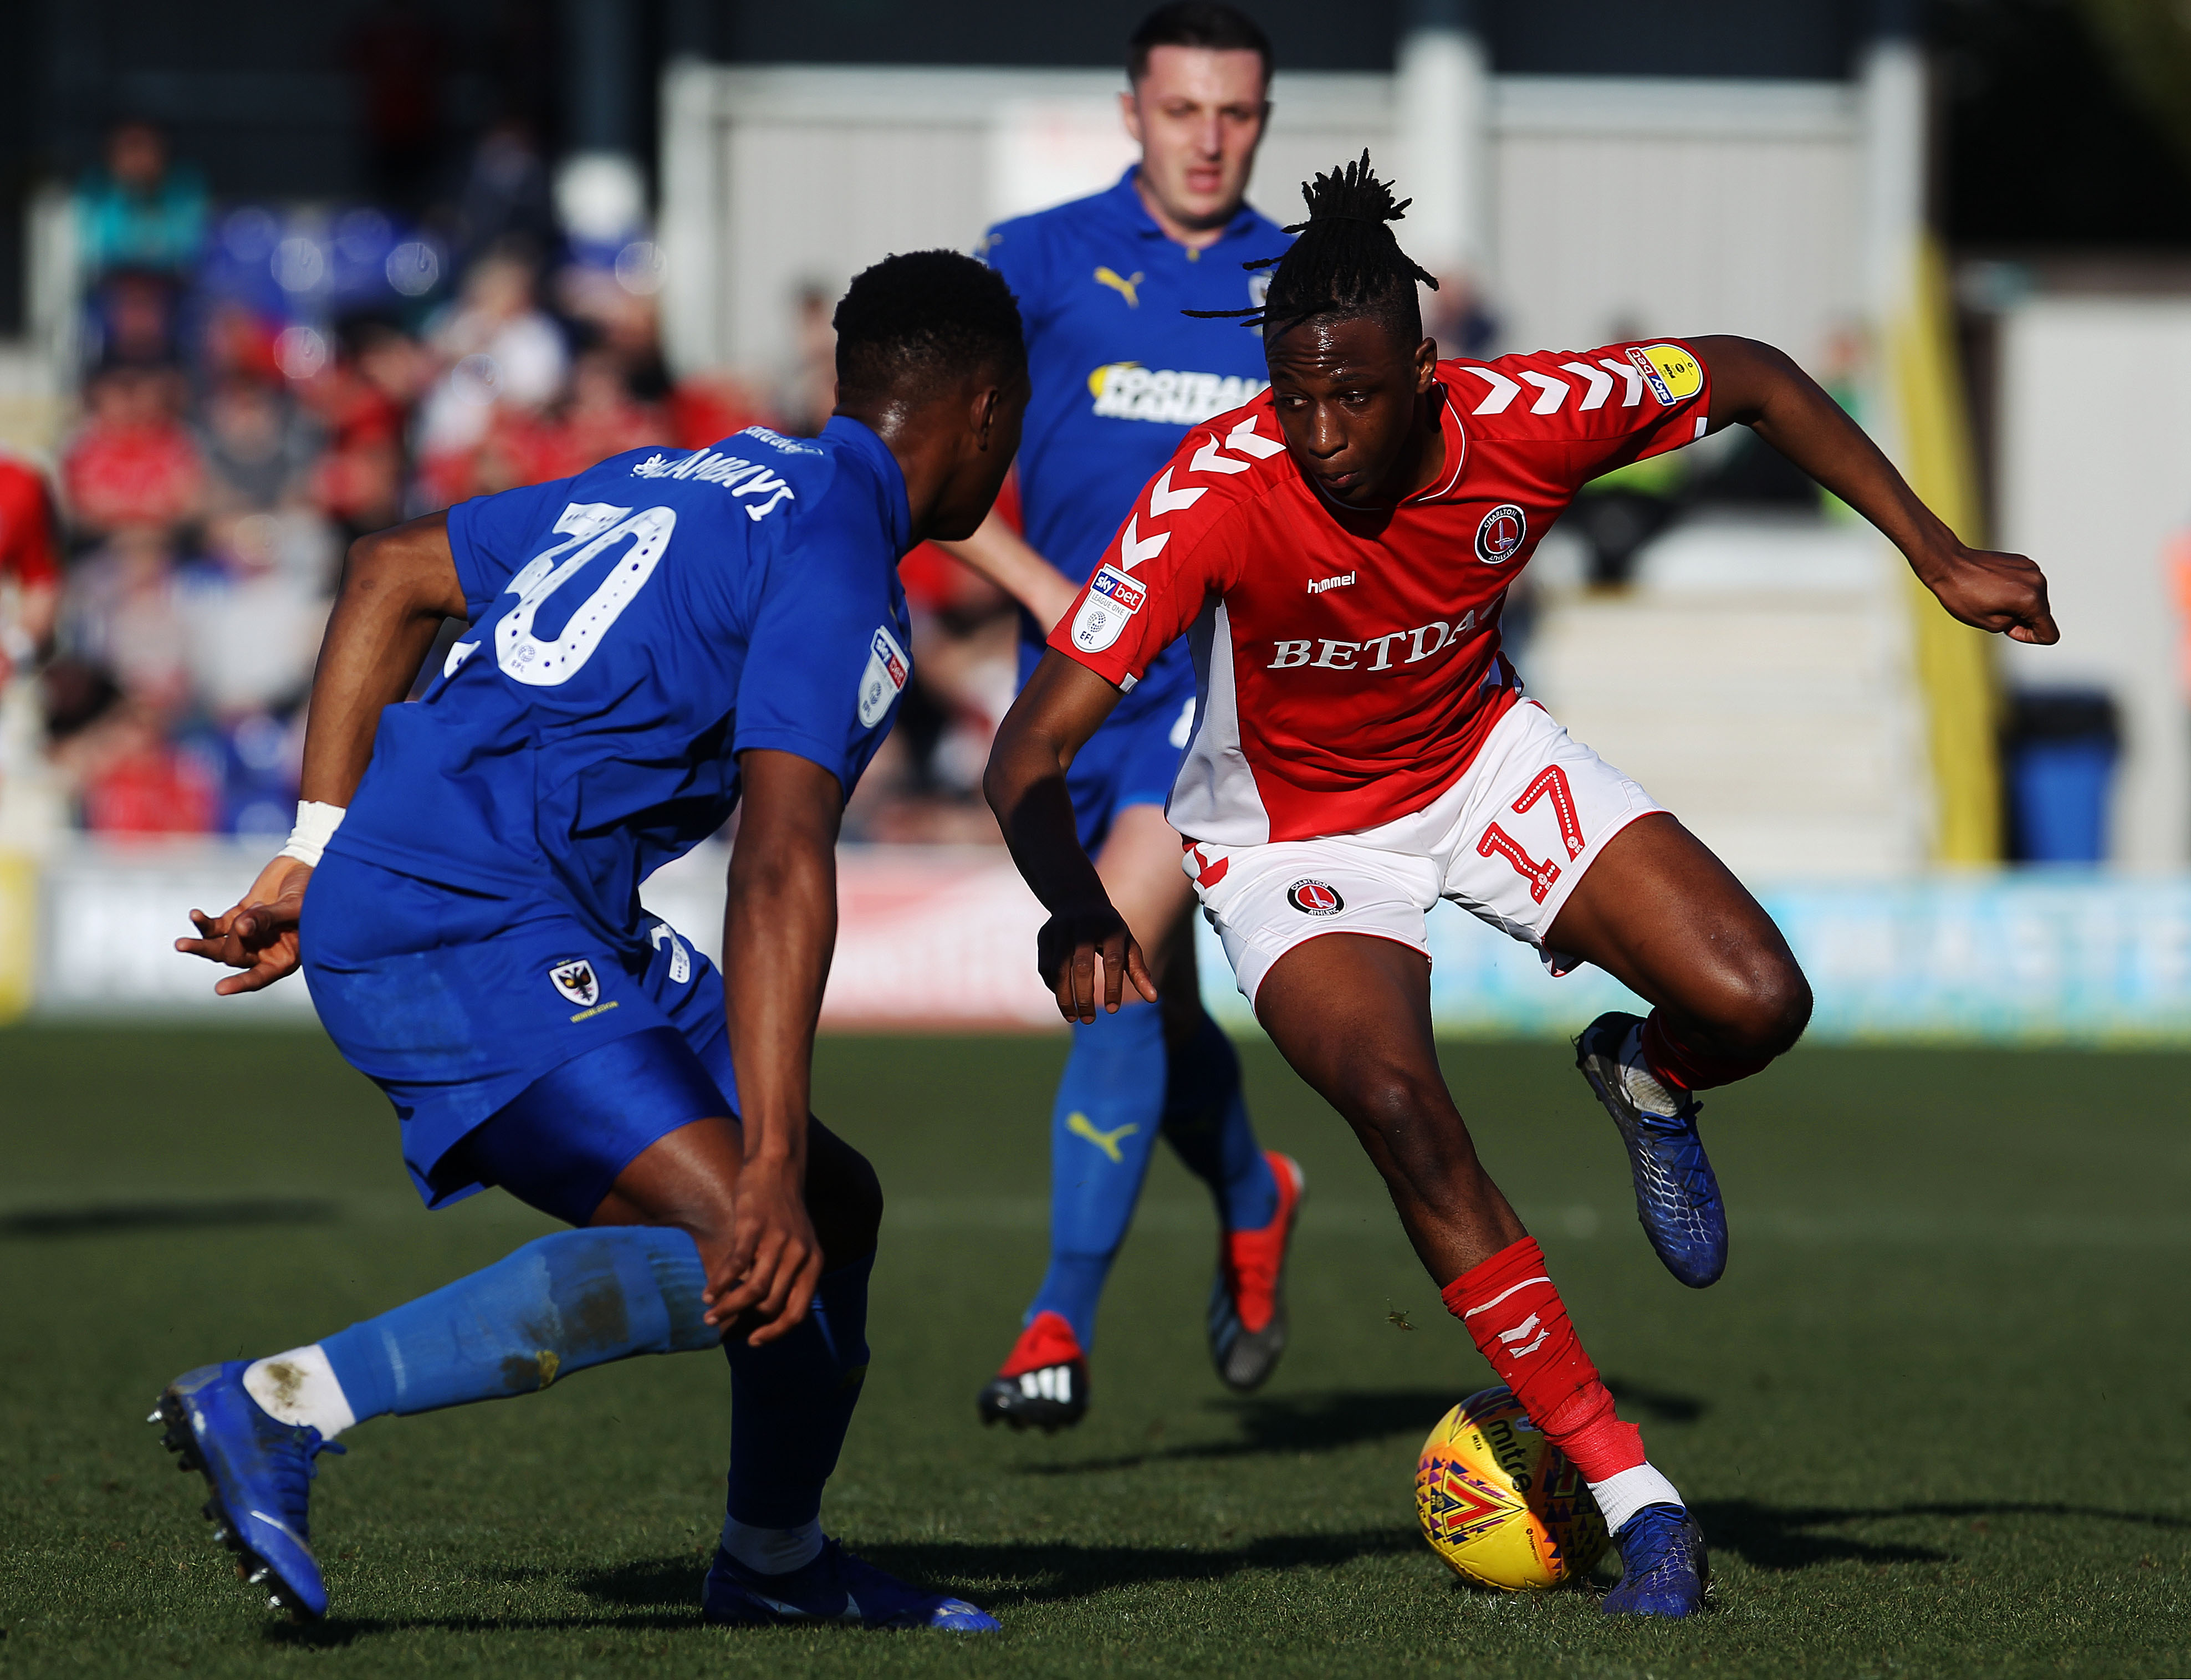 Crystal Palace will have to fork out at least £10 million to land Rangers star Joe Aribo in the January transfer window